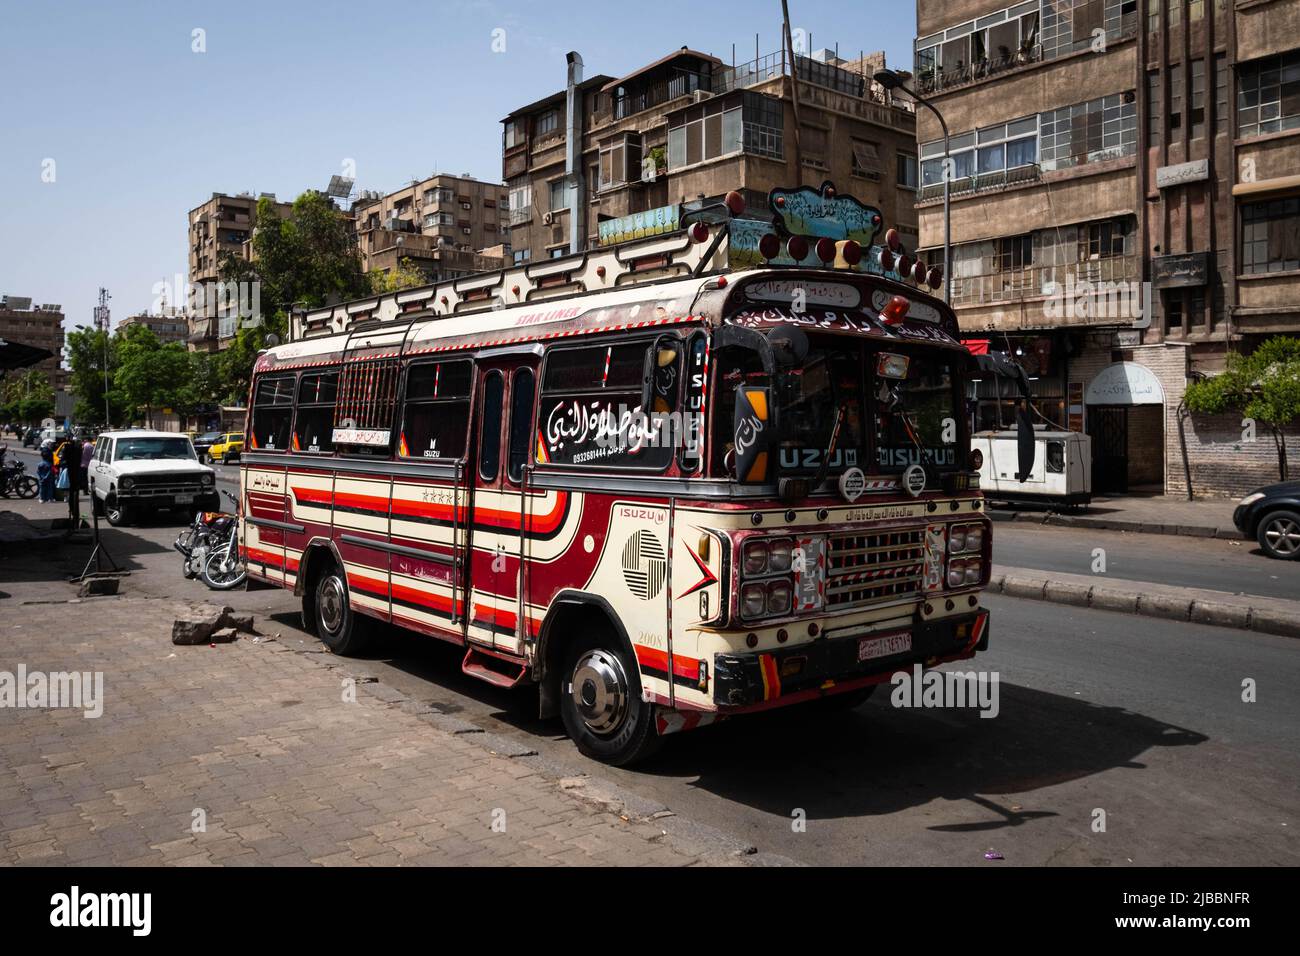 Damascus, Syria -May, 2022: Colorful old bus waiting at public bus station in Damascus Stock Photo